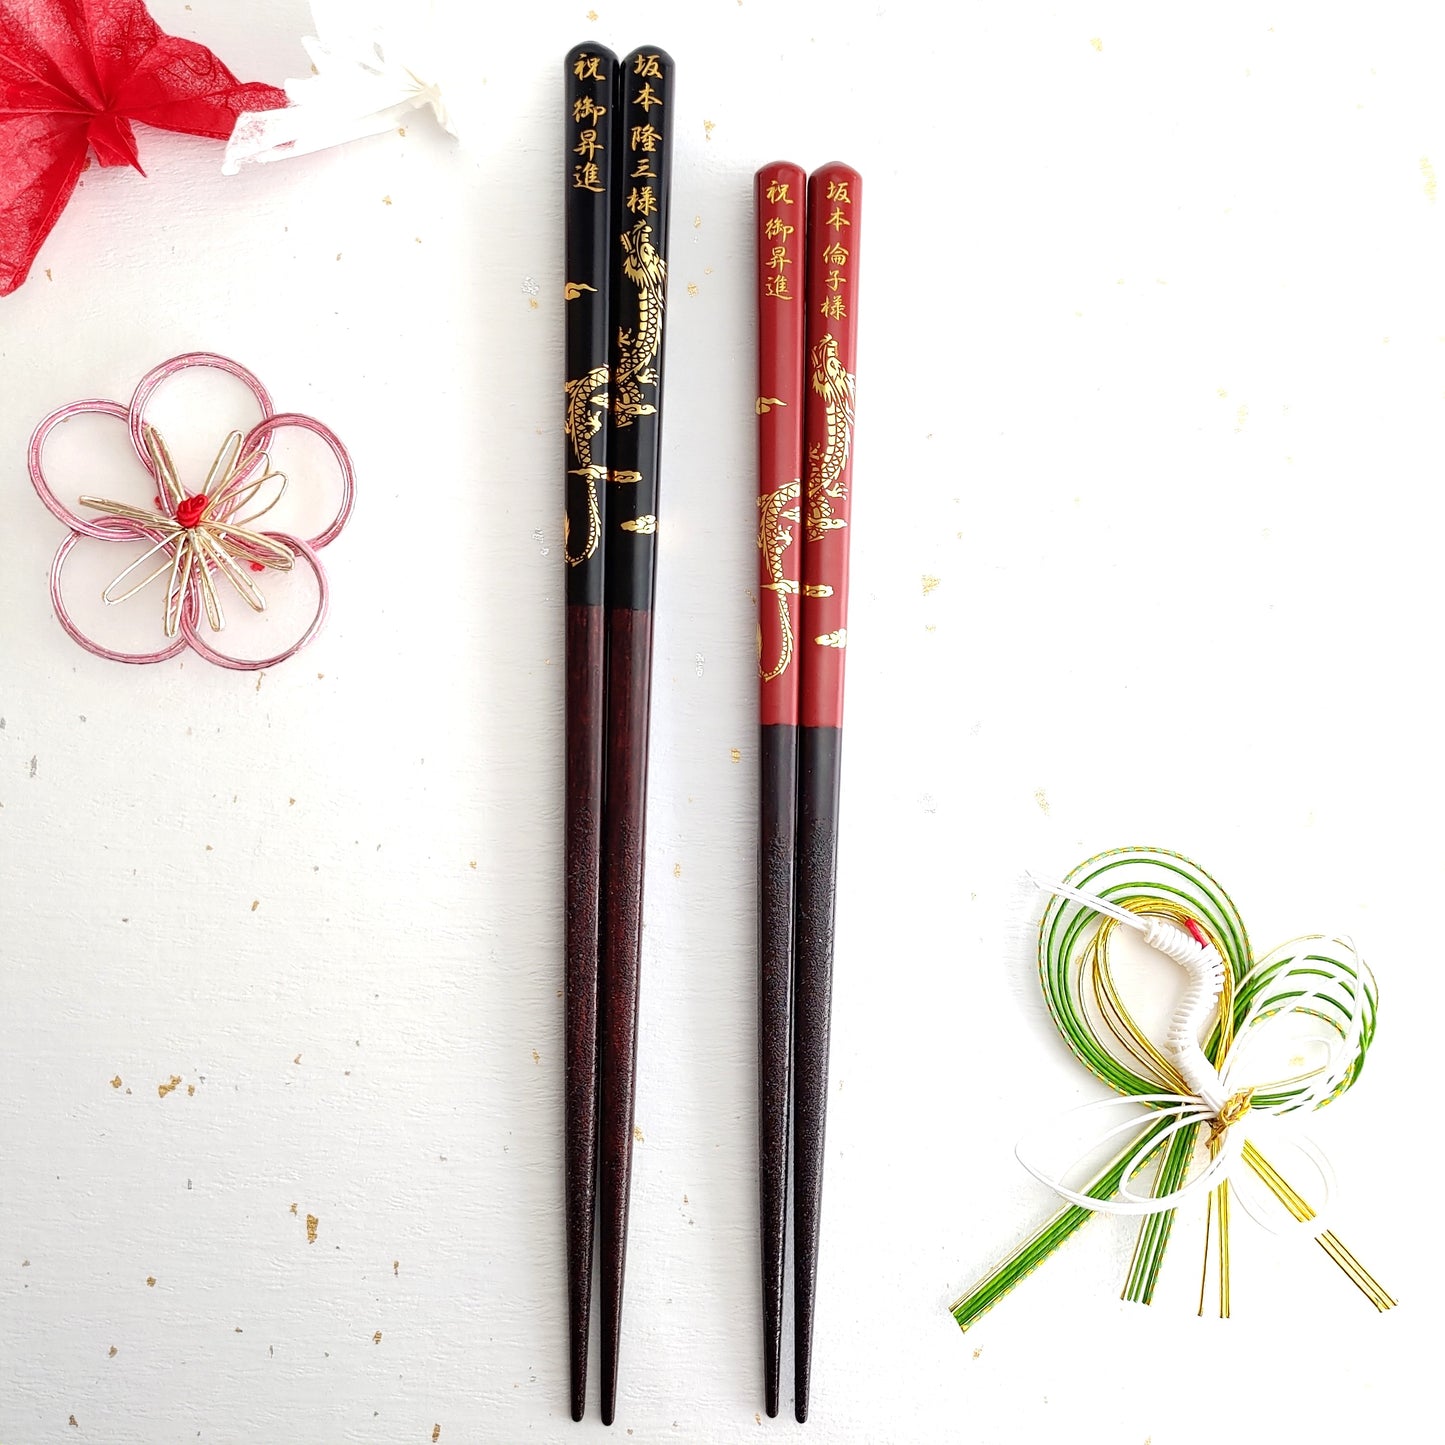 Awesome Japanese chopsticks with gold dragon floating in the clouds black red - SINGLE PAIR WITH ENGRAVED WOODEN BOX SET